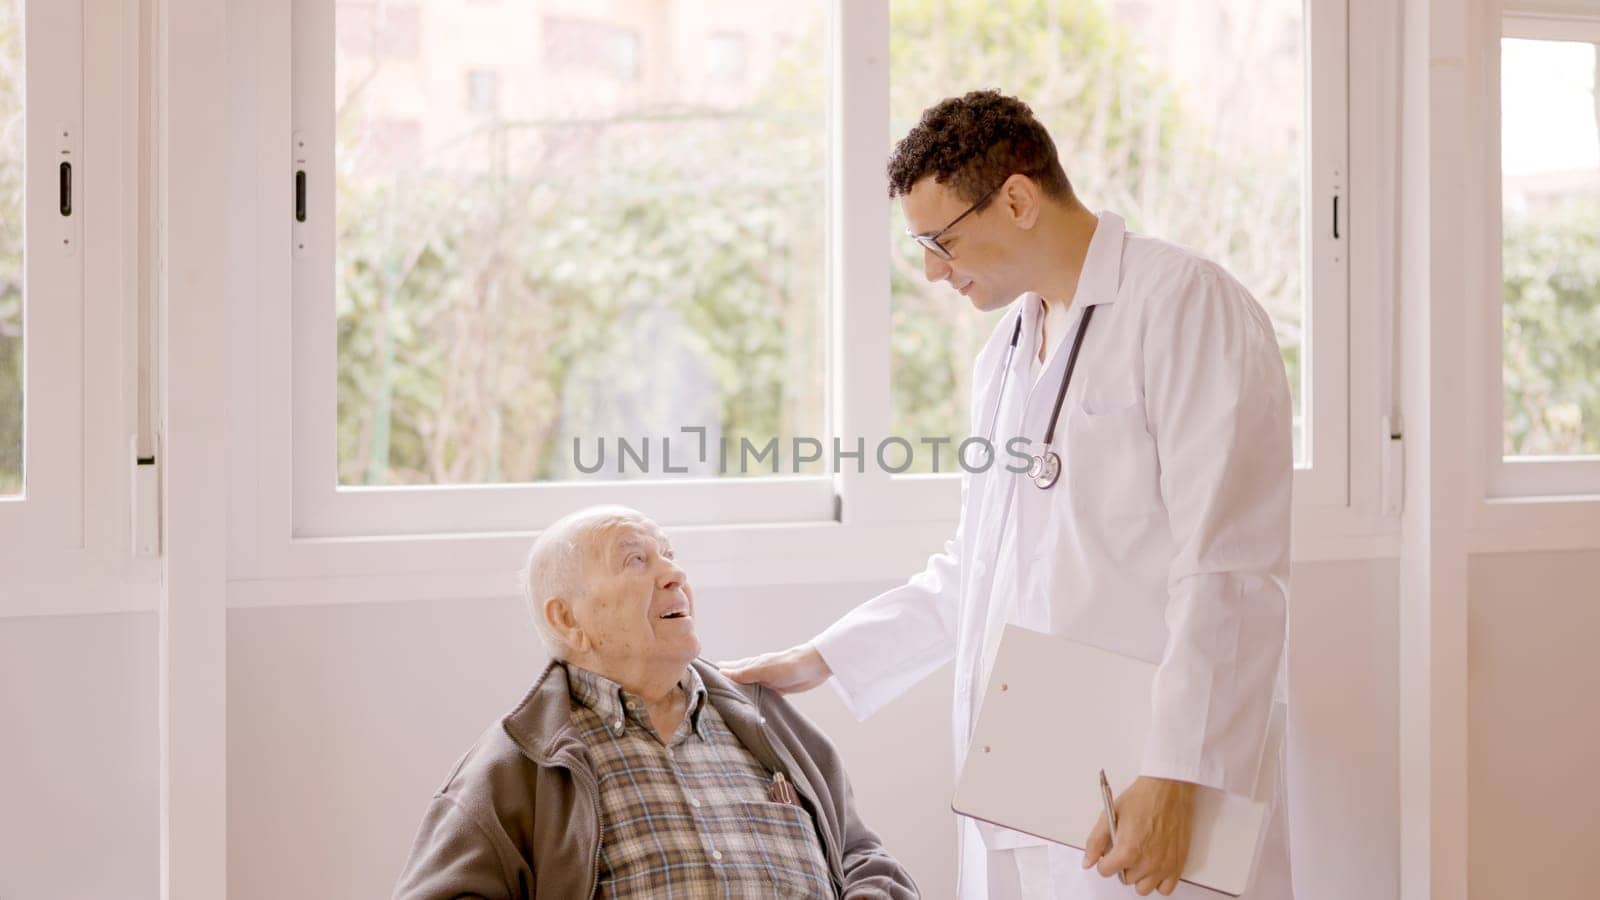 Male doctor standing talking with a senior man in a medical checking routine the nursing home